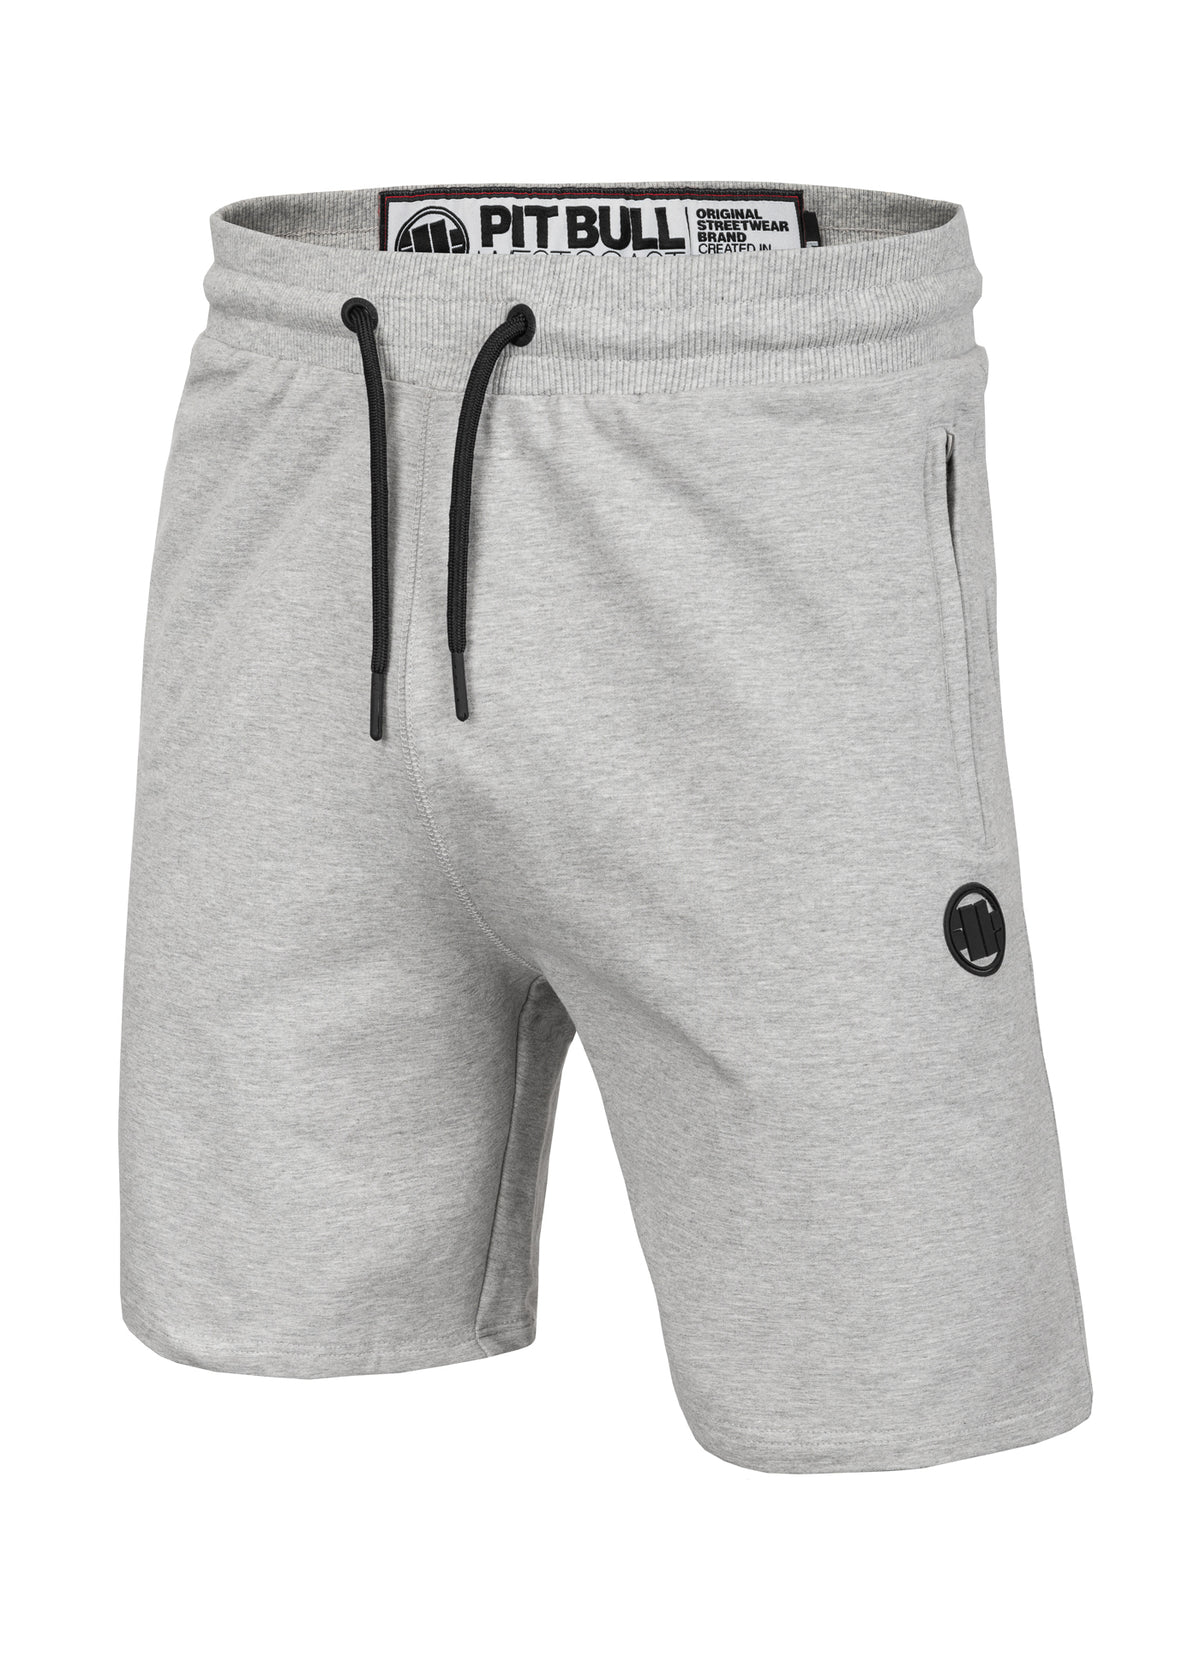 SMALL LOGO FRENCH TERRY 220 Grey Shorts.